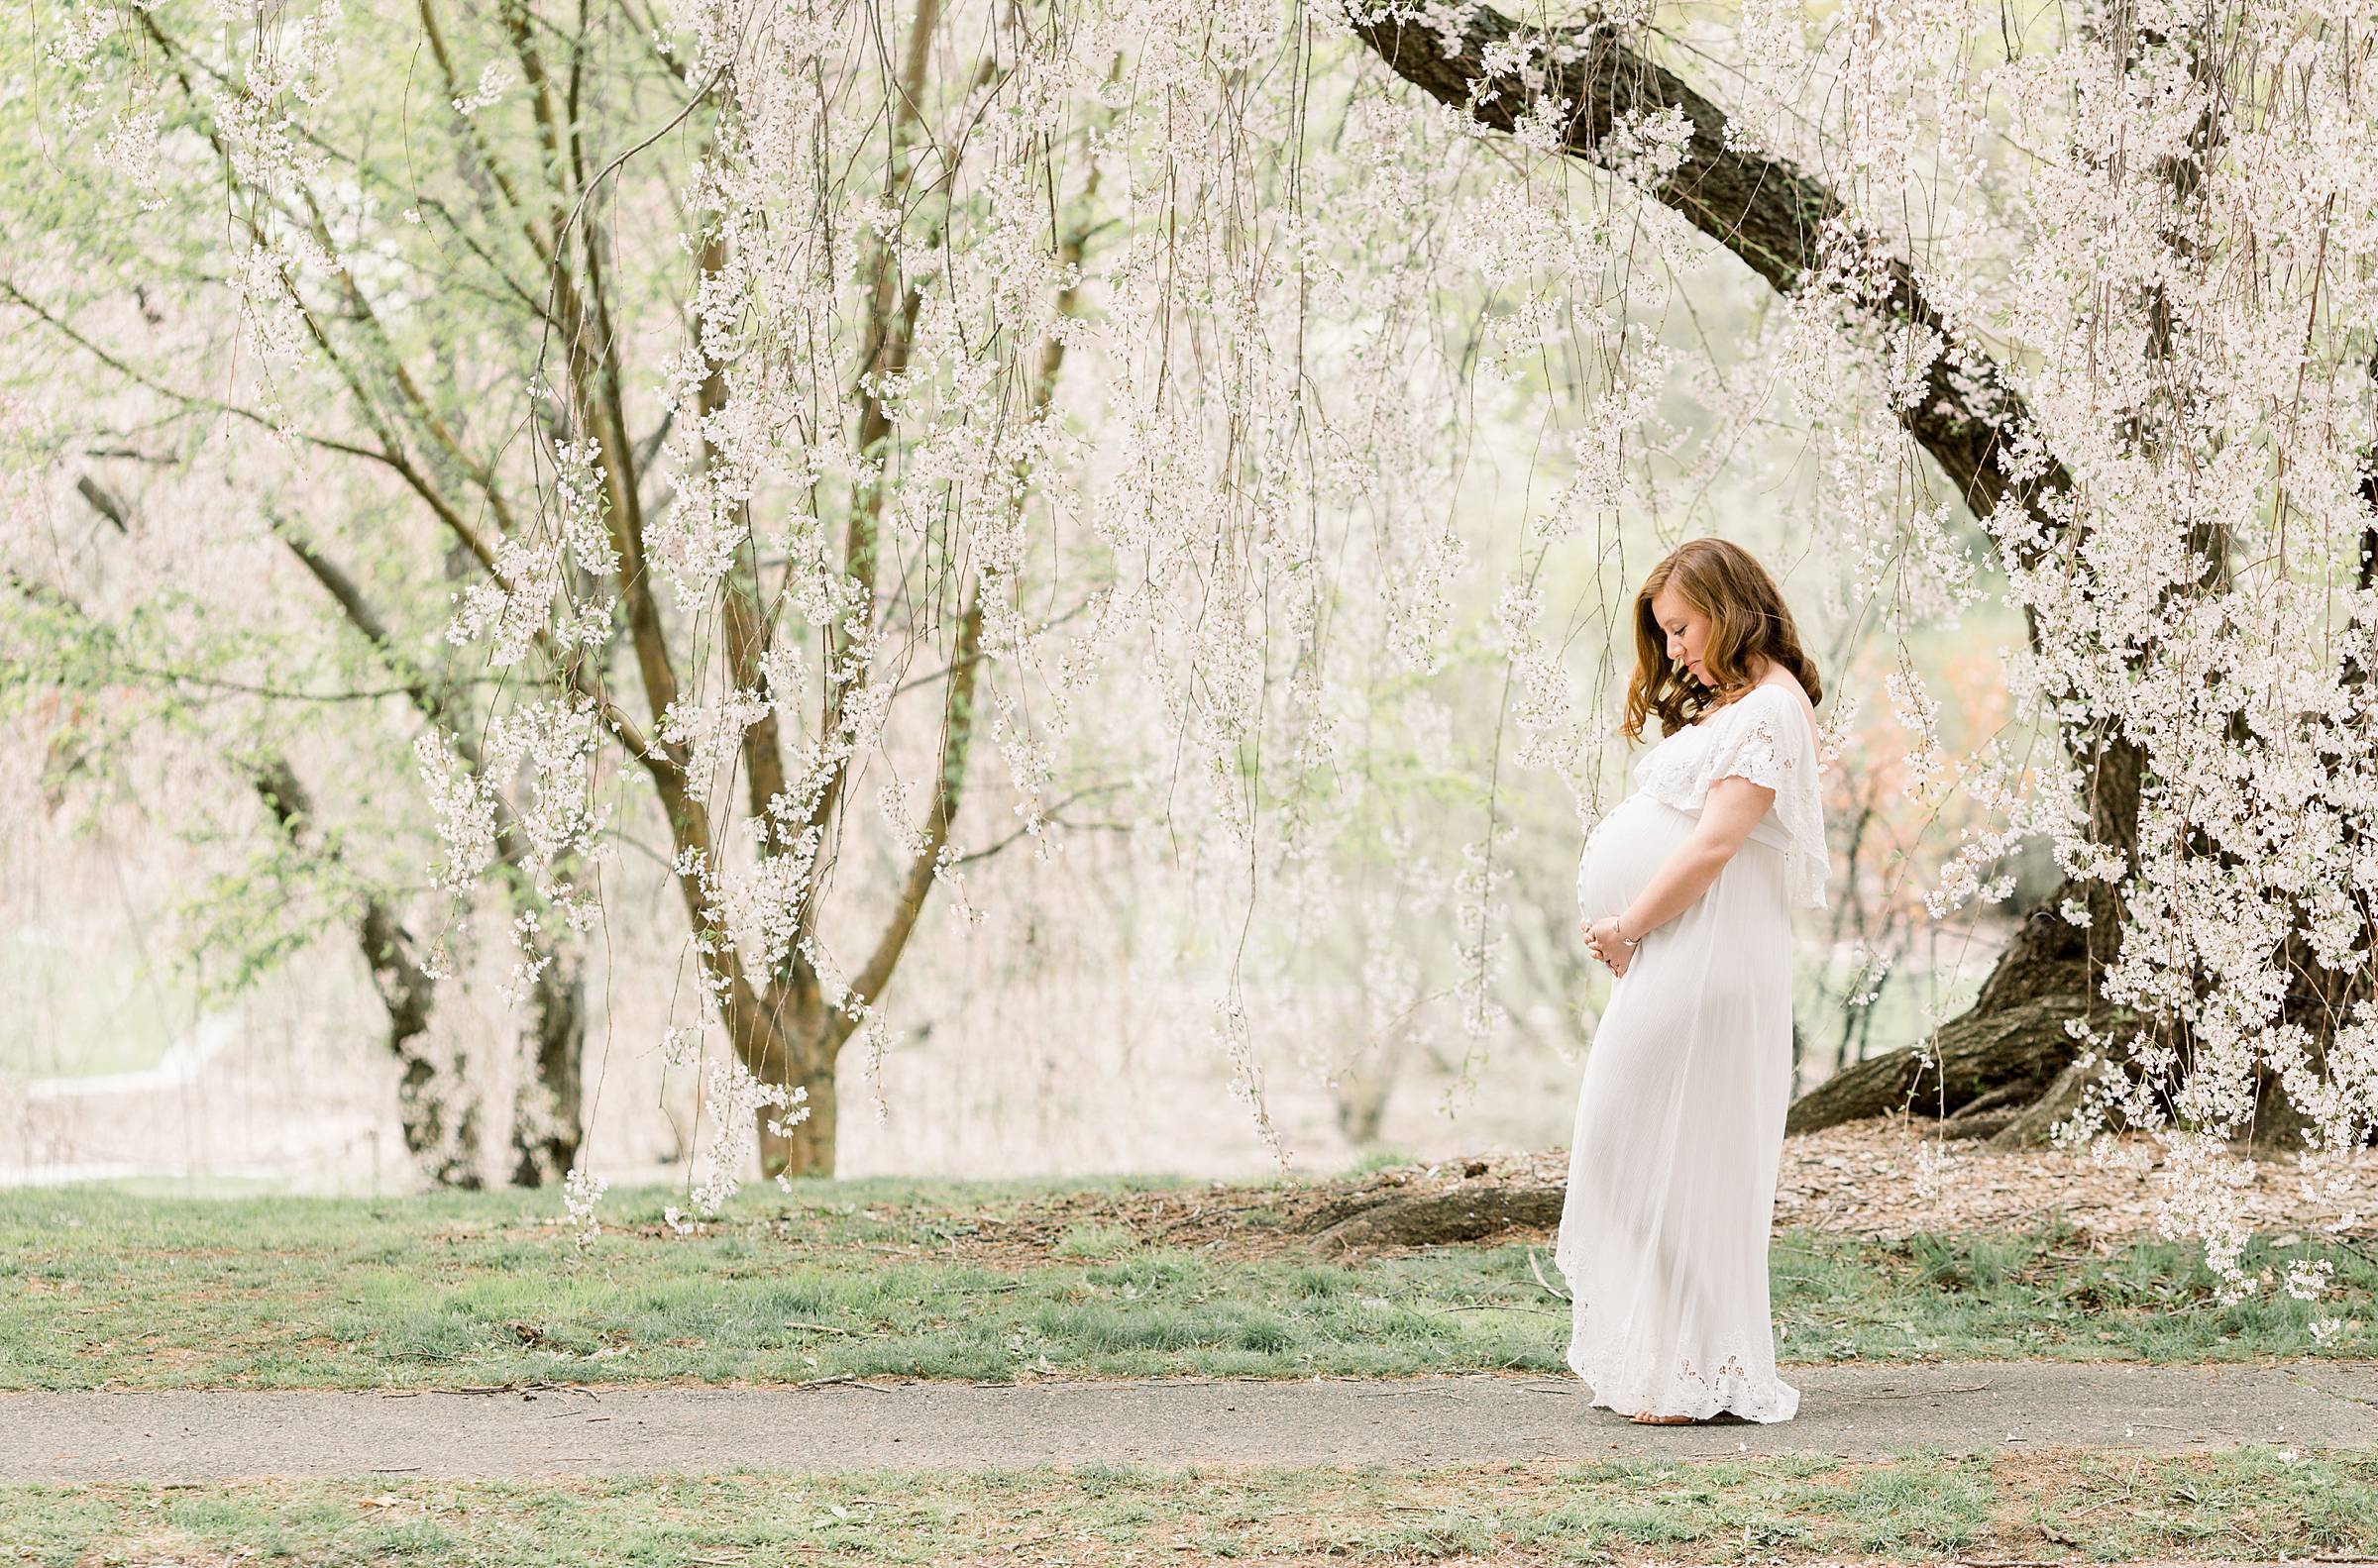 Pregnant woman in white dress in a grove of cherry trees